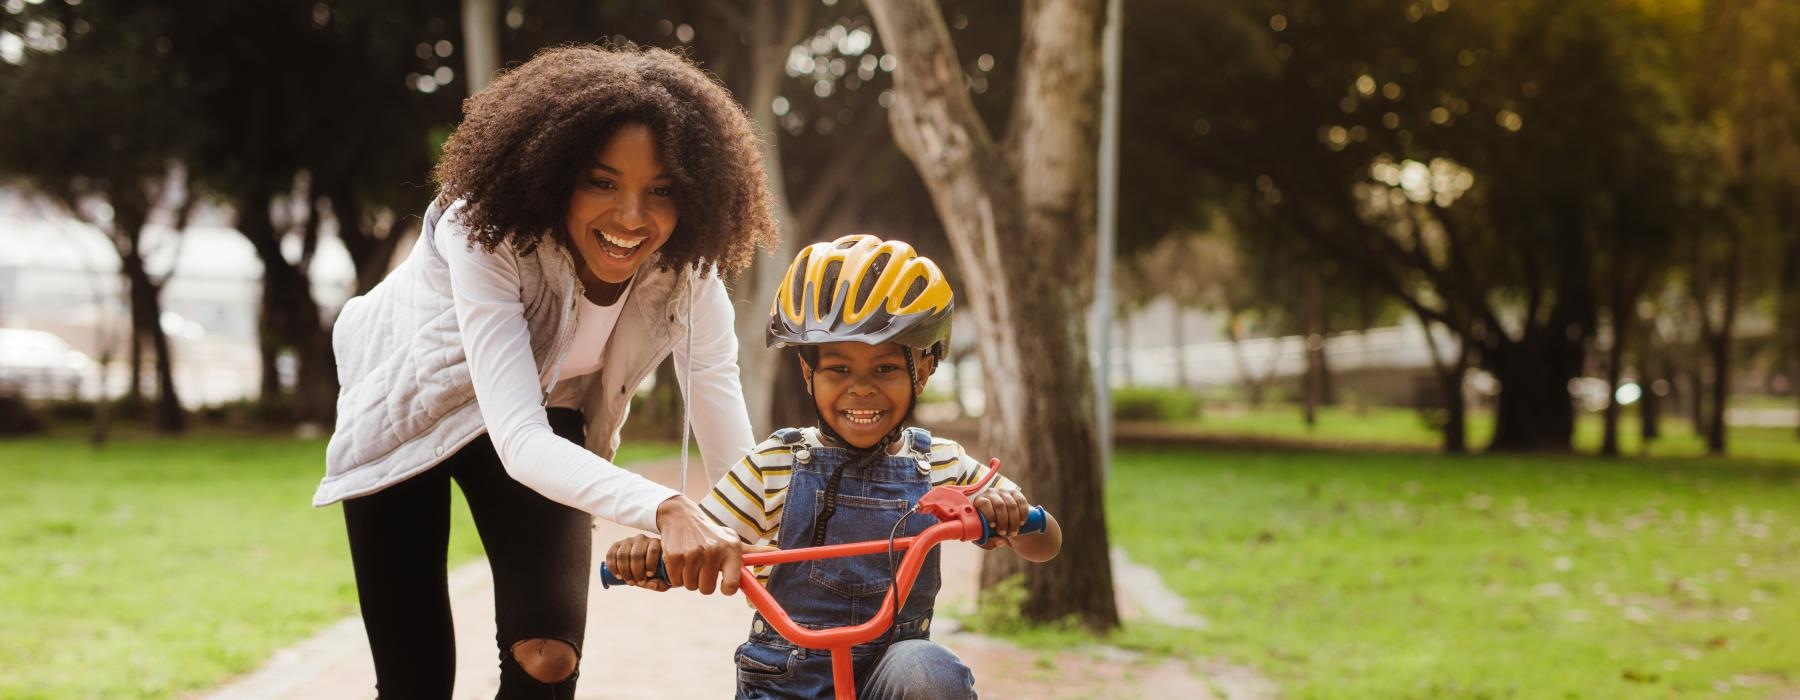 a person and a child riding a bicycle